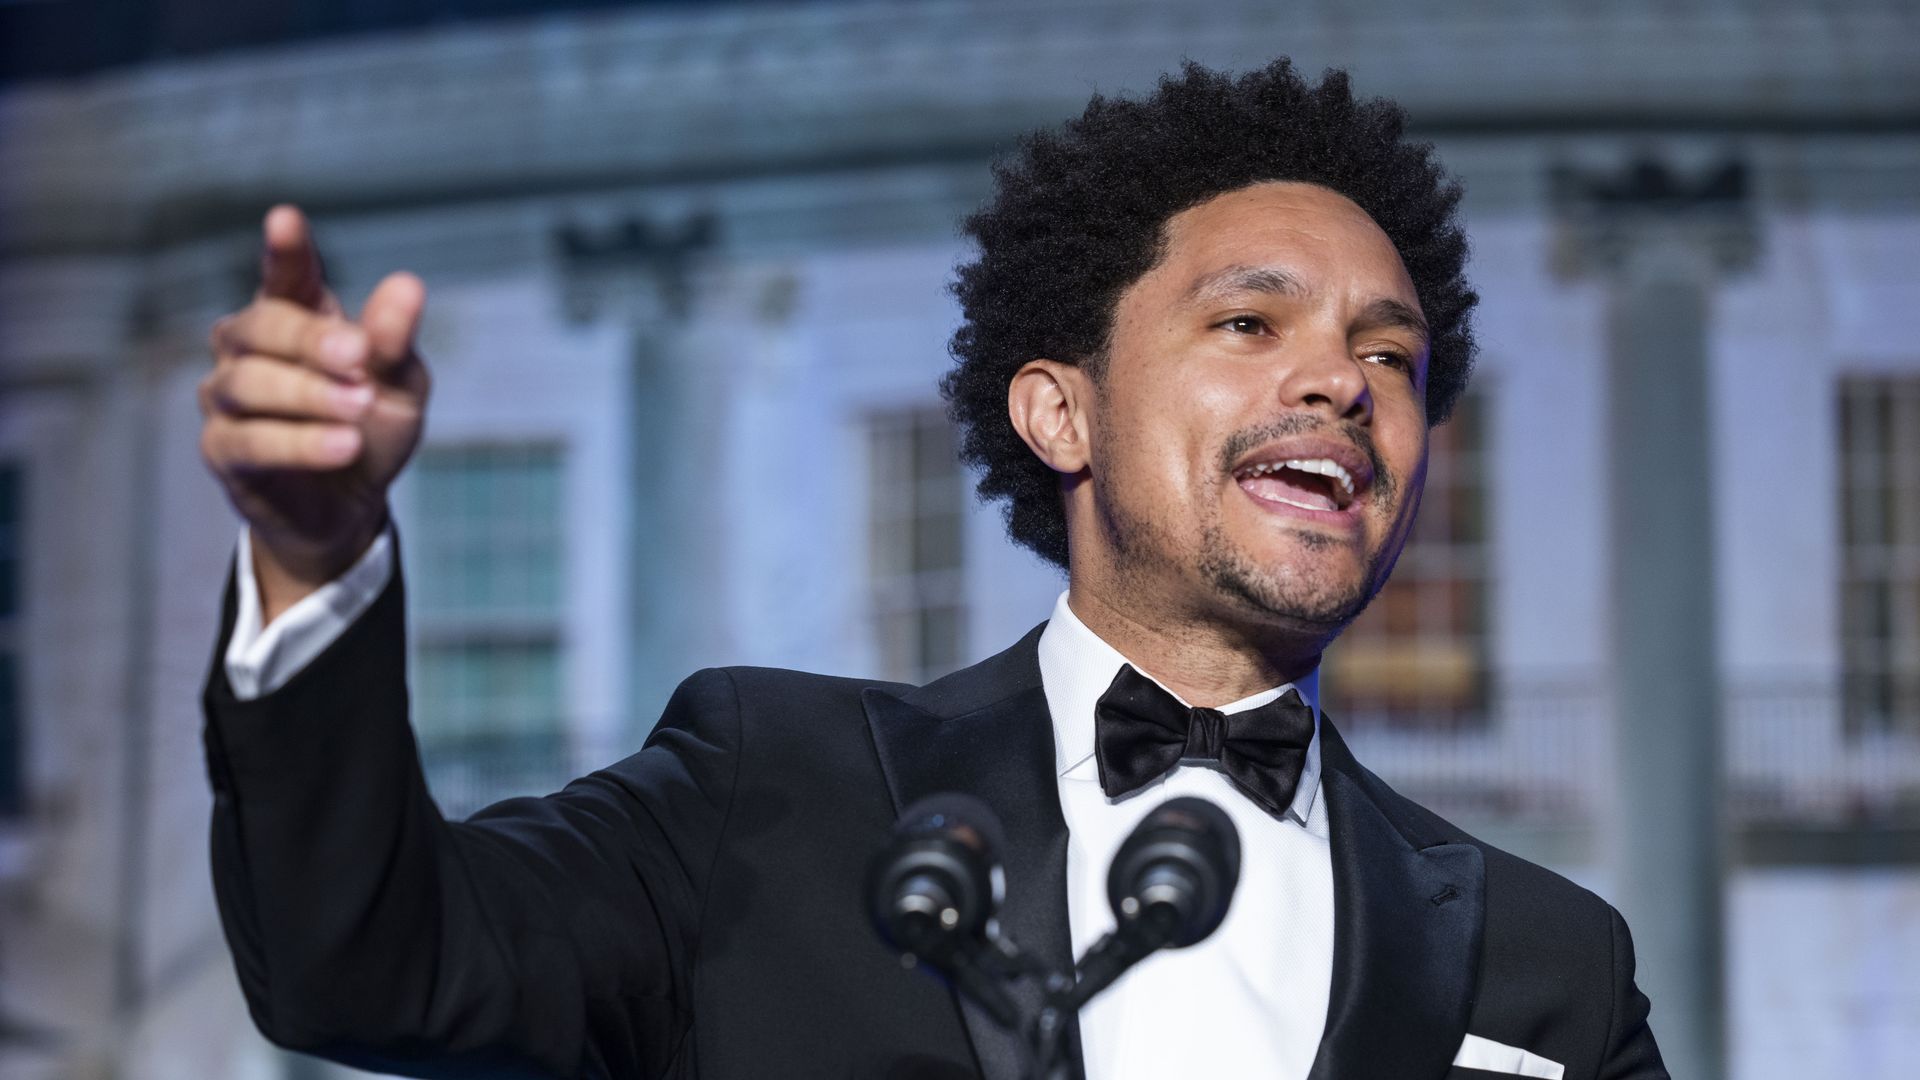 Trevor Noah, host of "The Daily Show" on Comedy Central, speaks during the White House Correspondents' Association (WHCA) dinner in Washington, D.C., U.S., on Saturday.